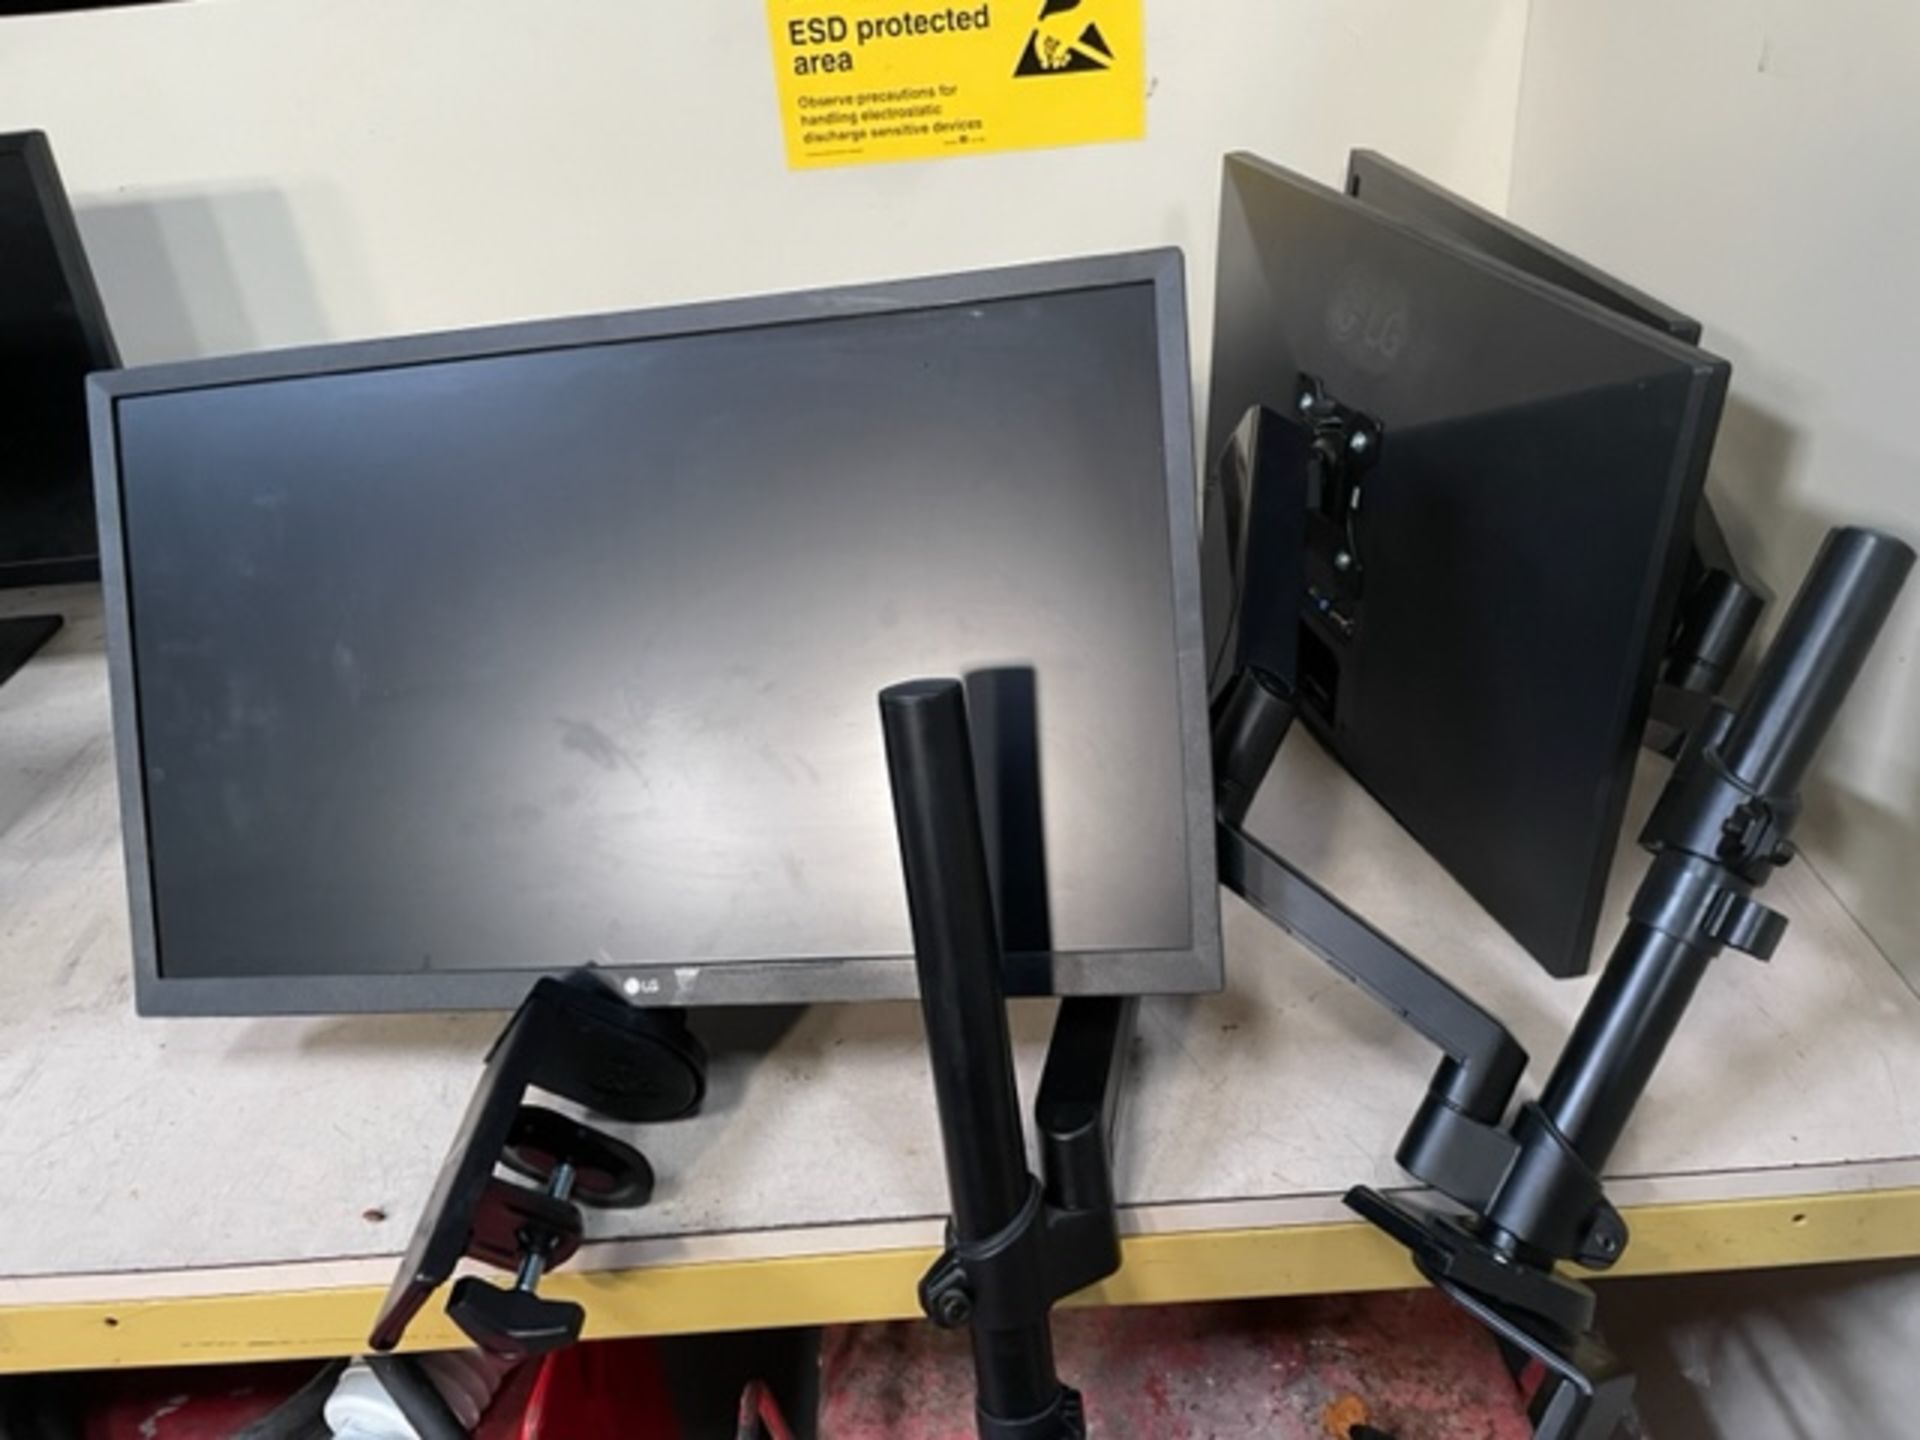 4 LG 24MK430 H Monitors on Adjustable Brackets (Location Brentwood. Please Refer to General Notes)